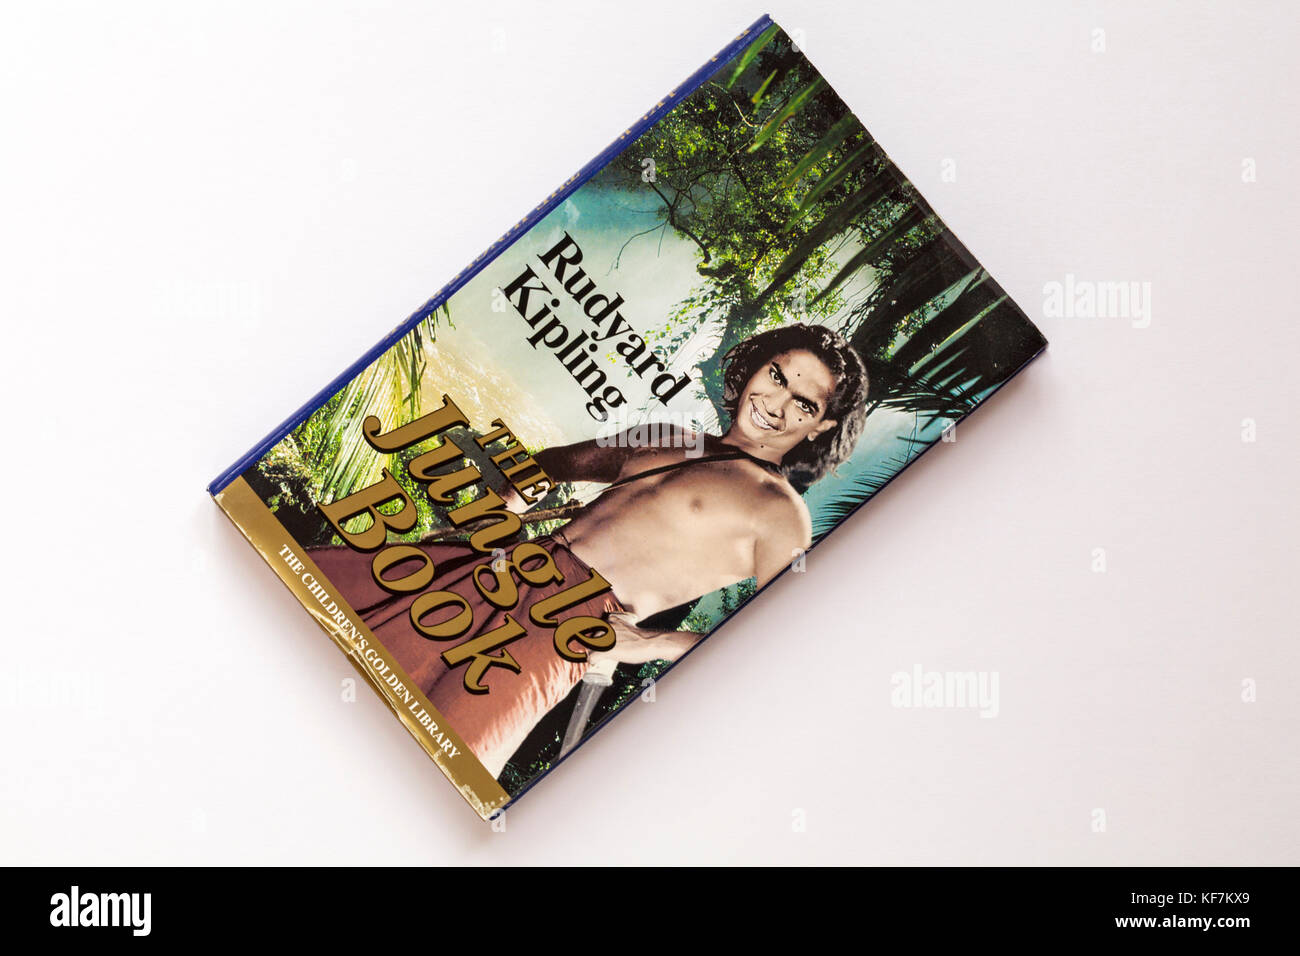 The Jungle Book Cover High Resolution Stock Photography and Images - Alamy